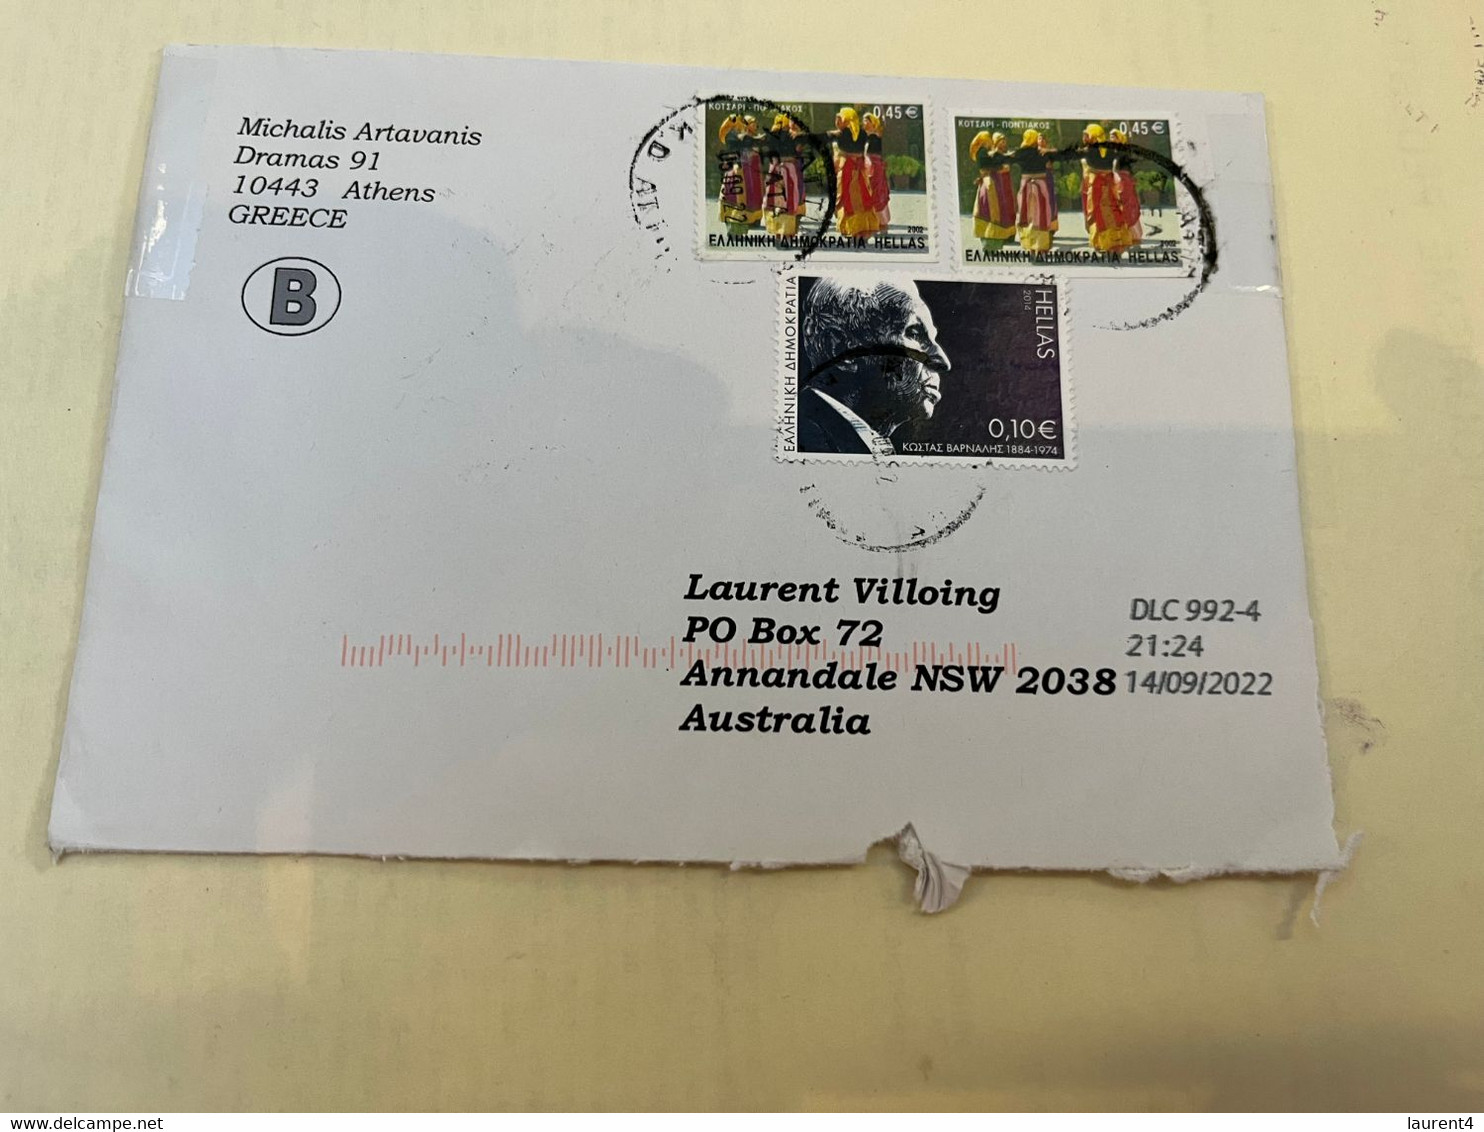 (1 L 7) Letter Posted From Greece To Australia (during COVID-19 Pandemic Crisis) 3 Stamps - Covers & Documents